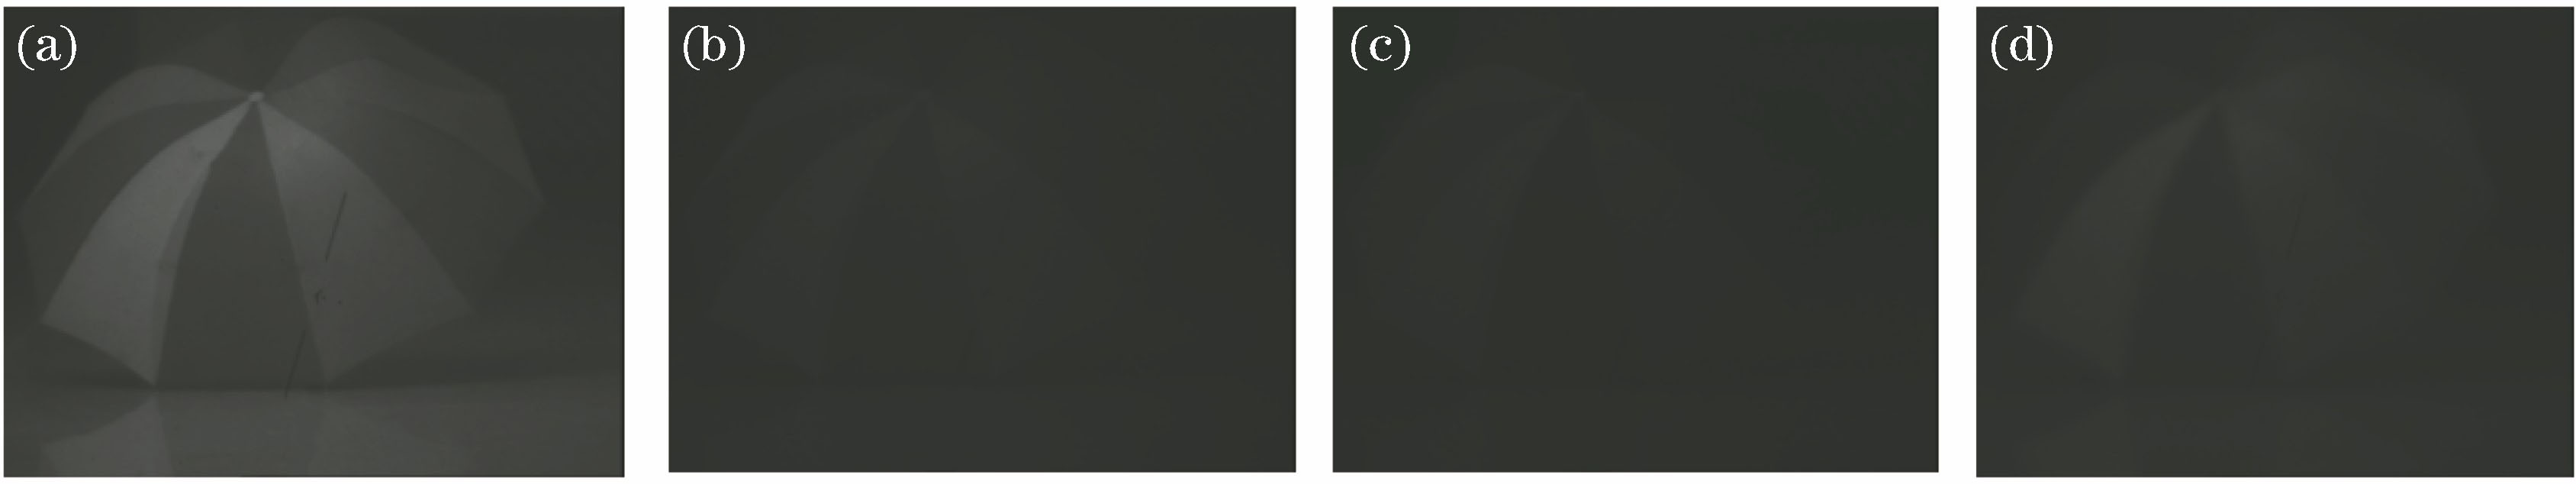 Source images for Scene 1. (a) Full-wave image; (b) short-wave image; (c) medium-wave image; (d) long-wave image